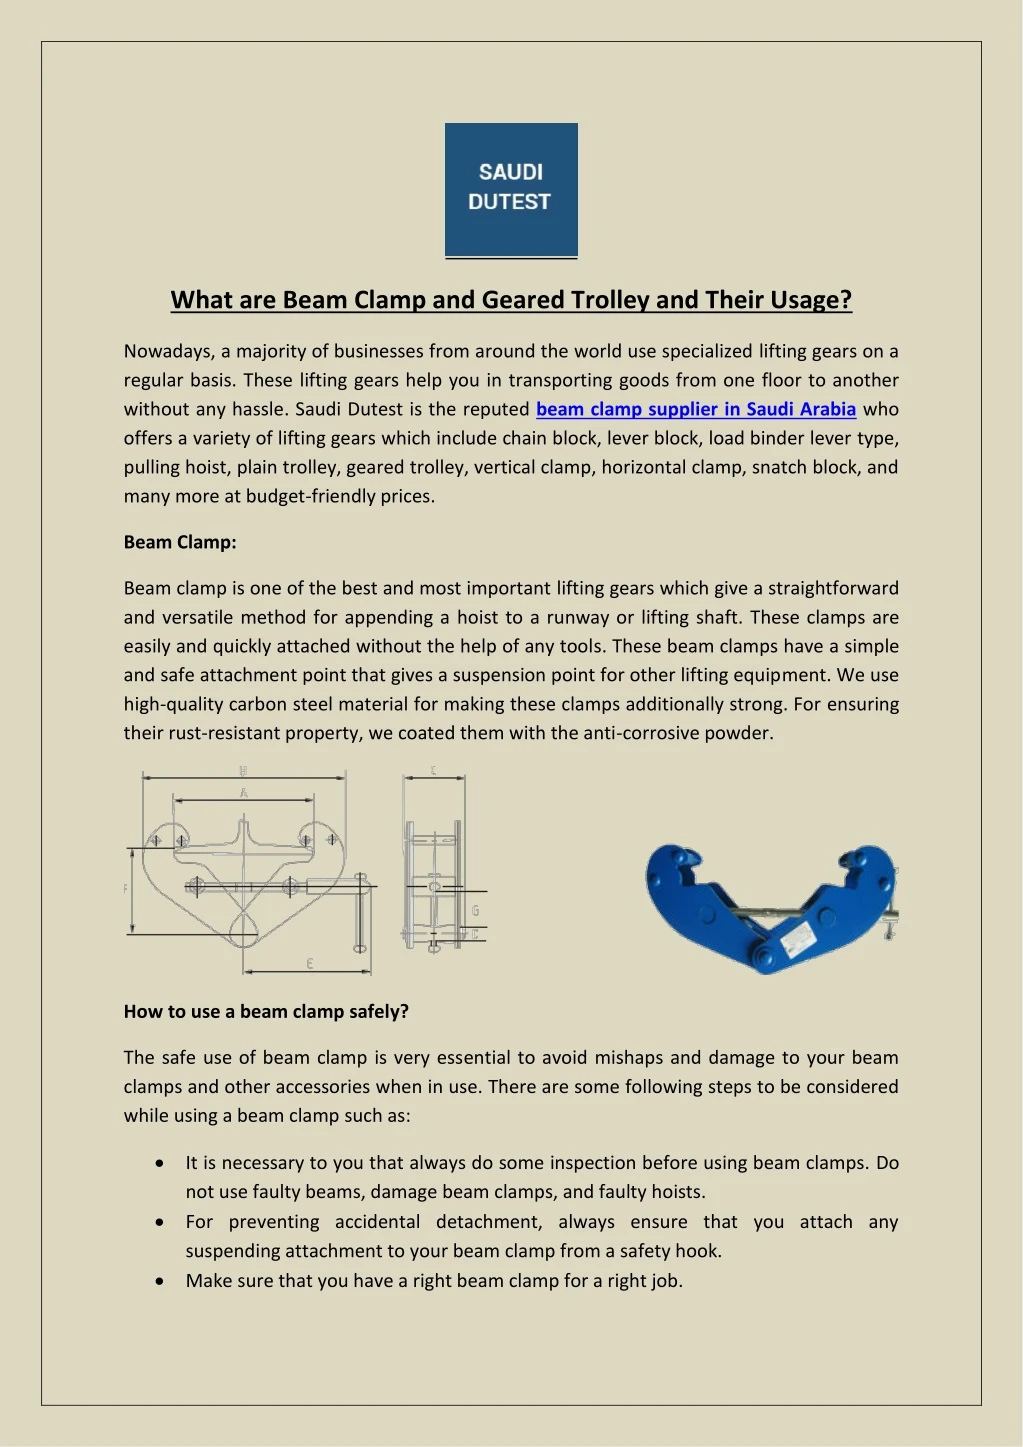 what are beam clamp and geared trolley and their